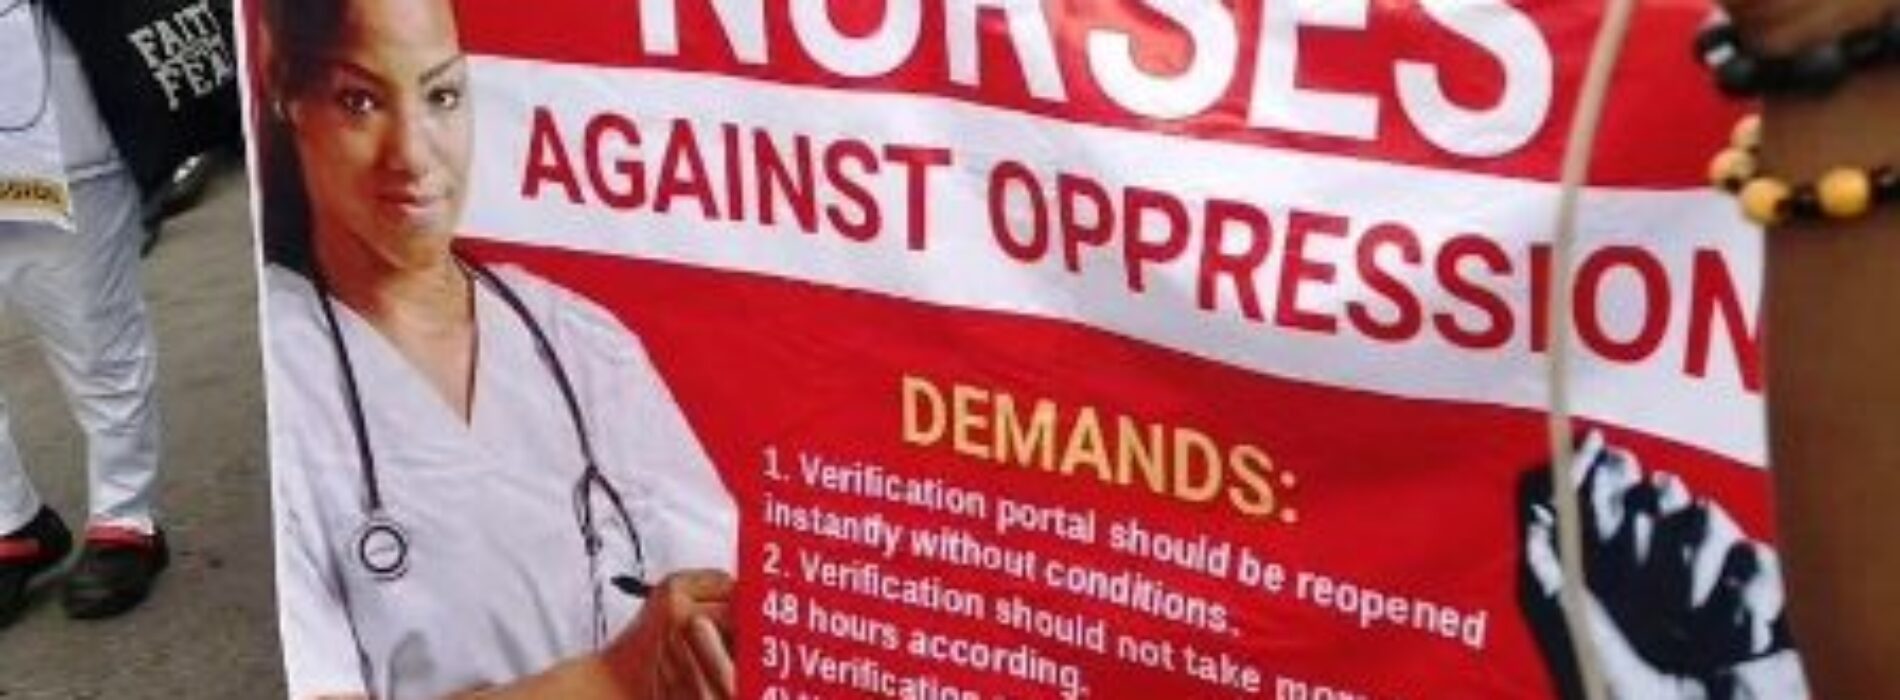 <strong>Nurses protest new verification guideline</strong>